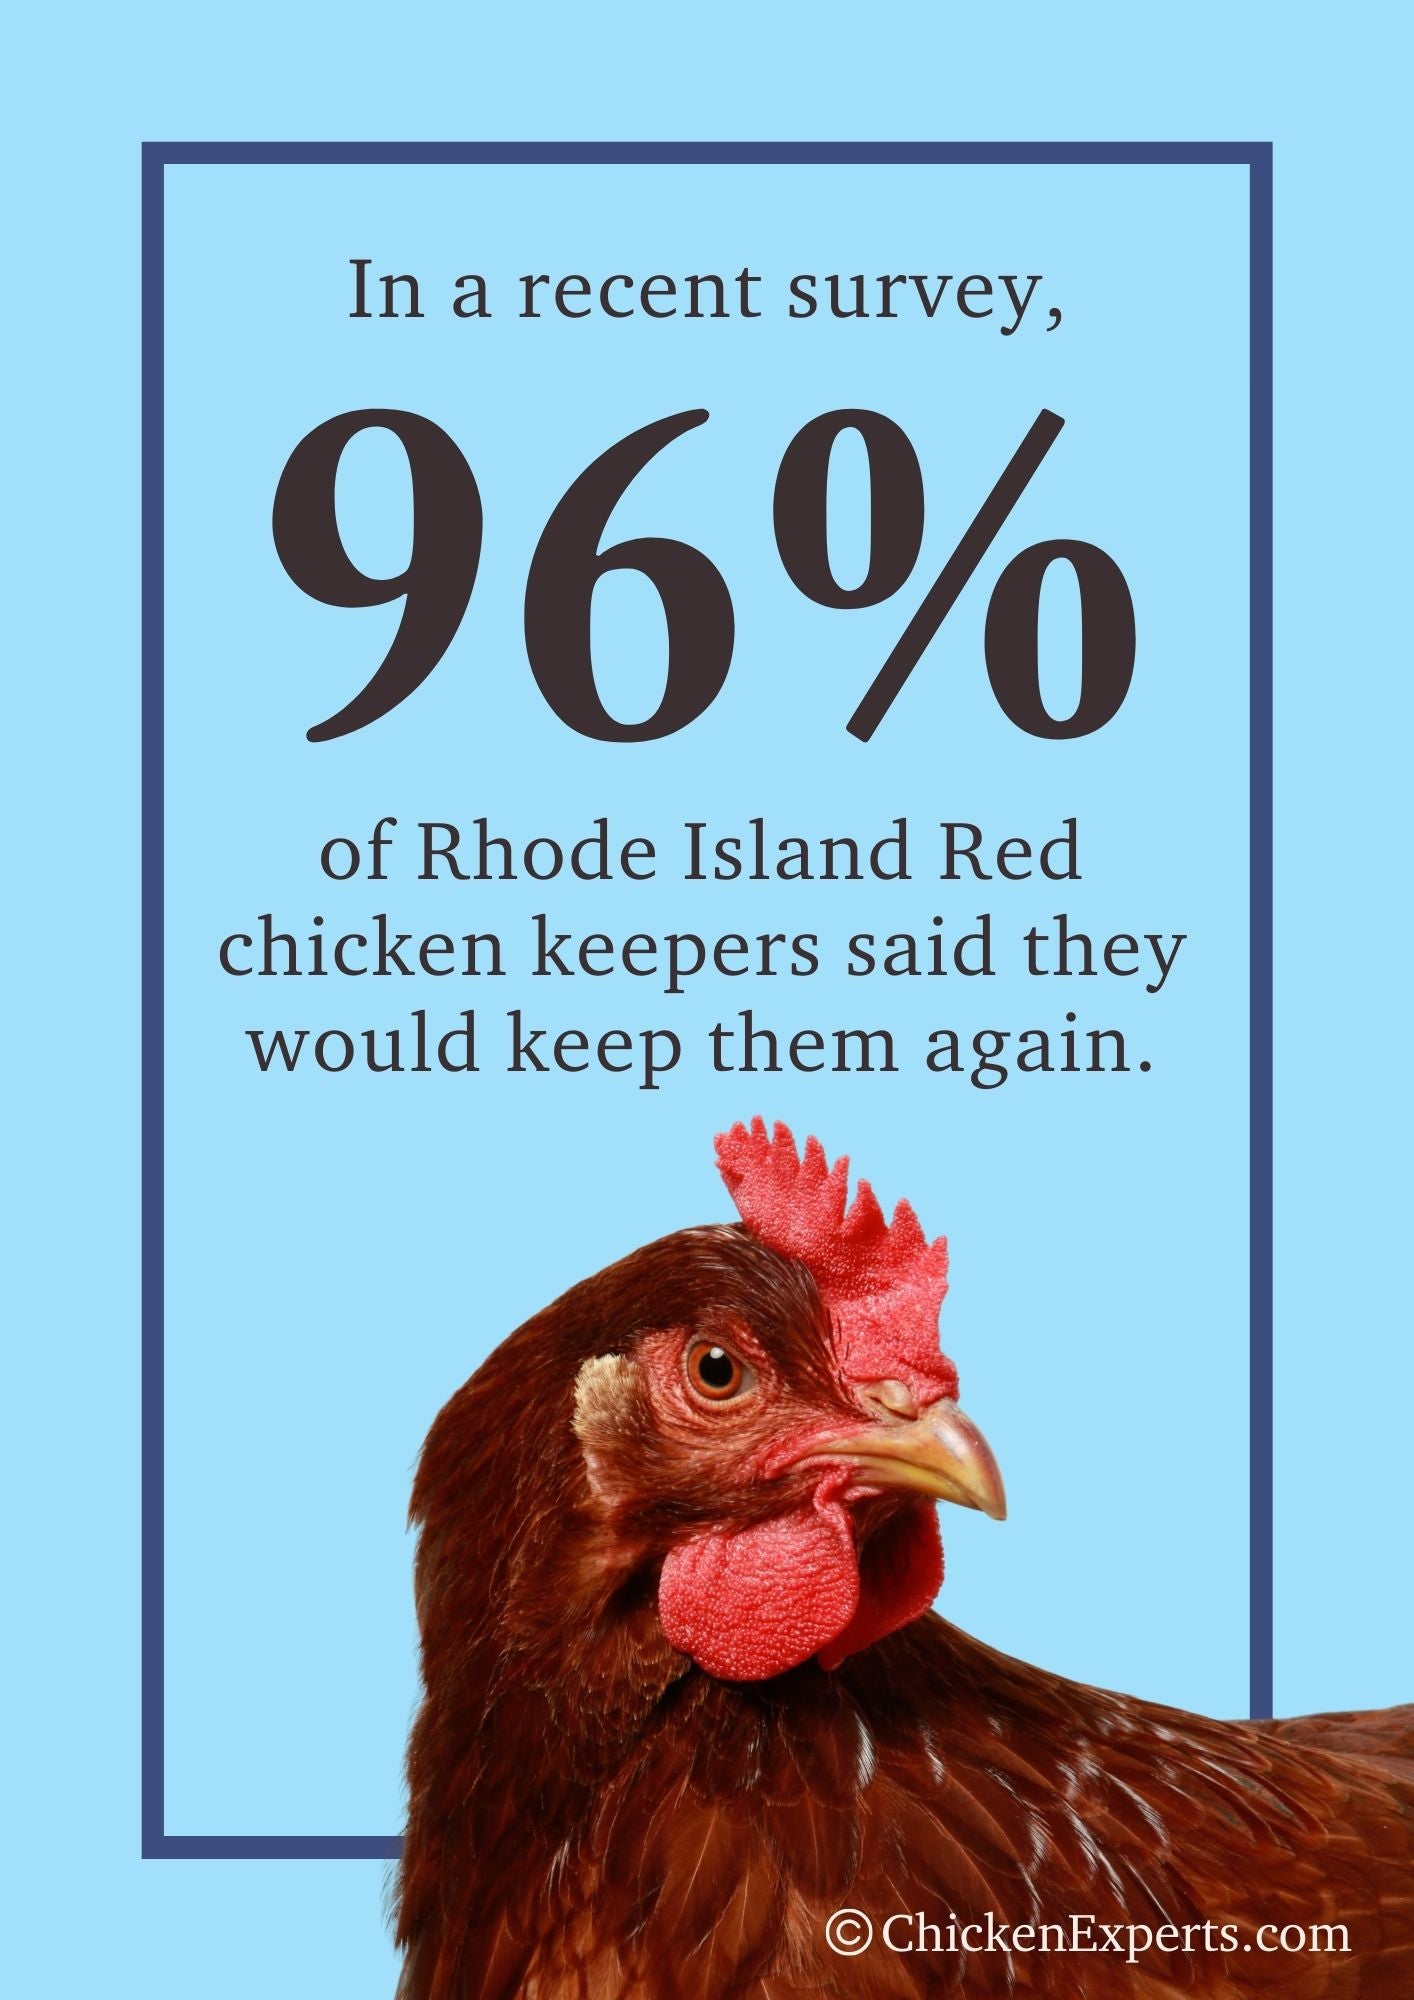 rhode island red chicken keepers will keep them again